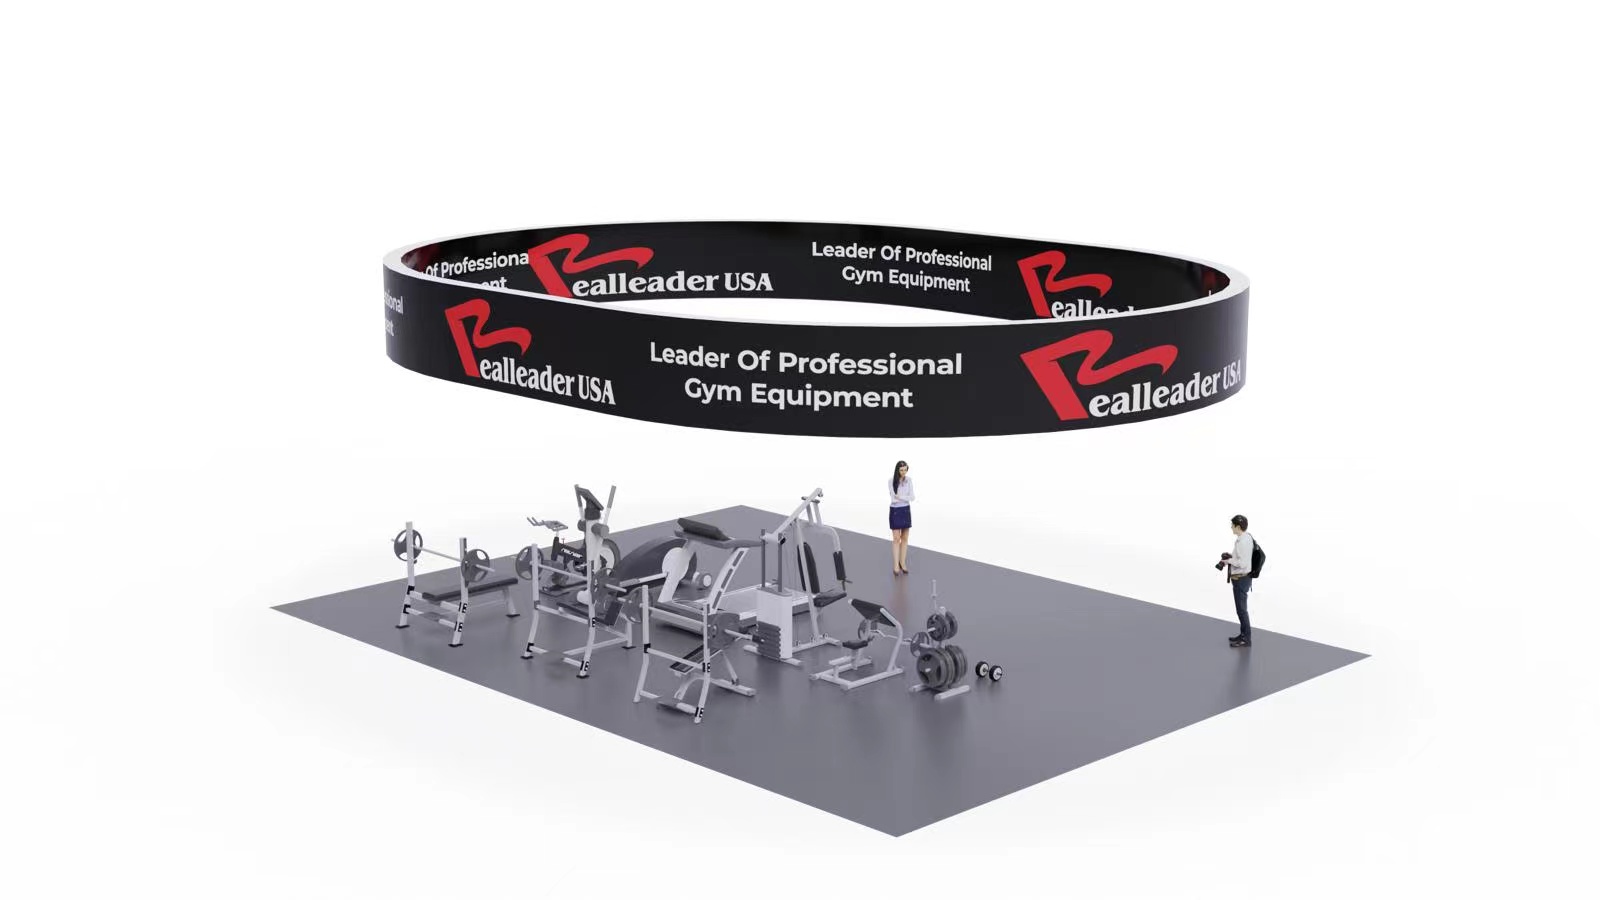 Come to Visit Realleader Booth NO1124 In IHRSA from 20th to 22th March (2)